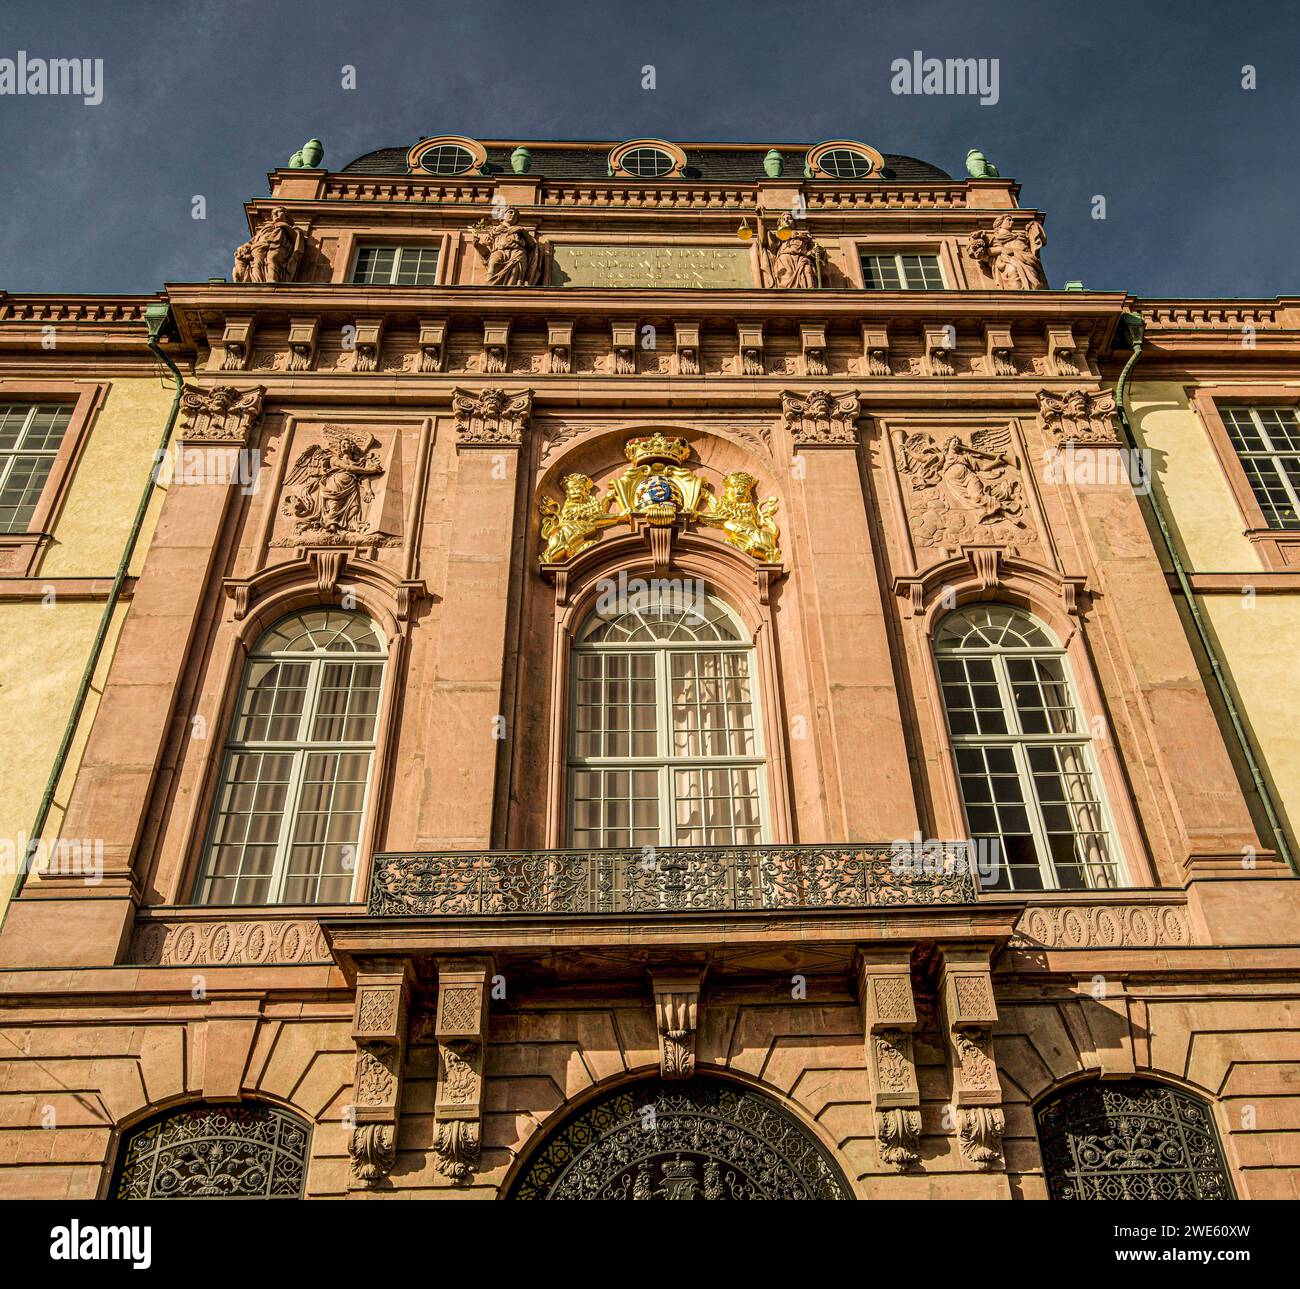 Facade of the residential palace in Darmstadt, Hesse, Germany Stock Photo